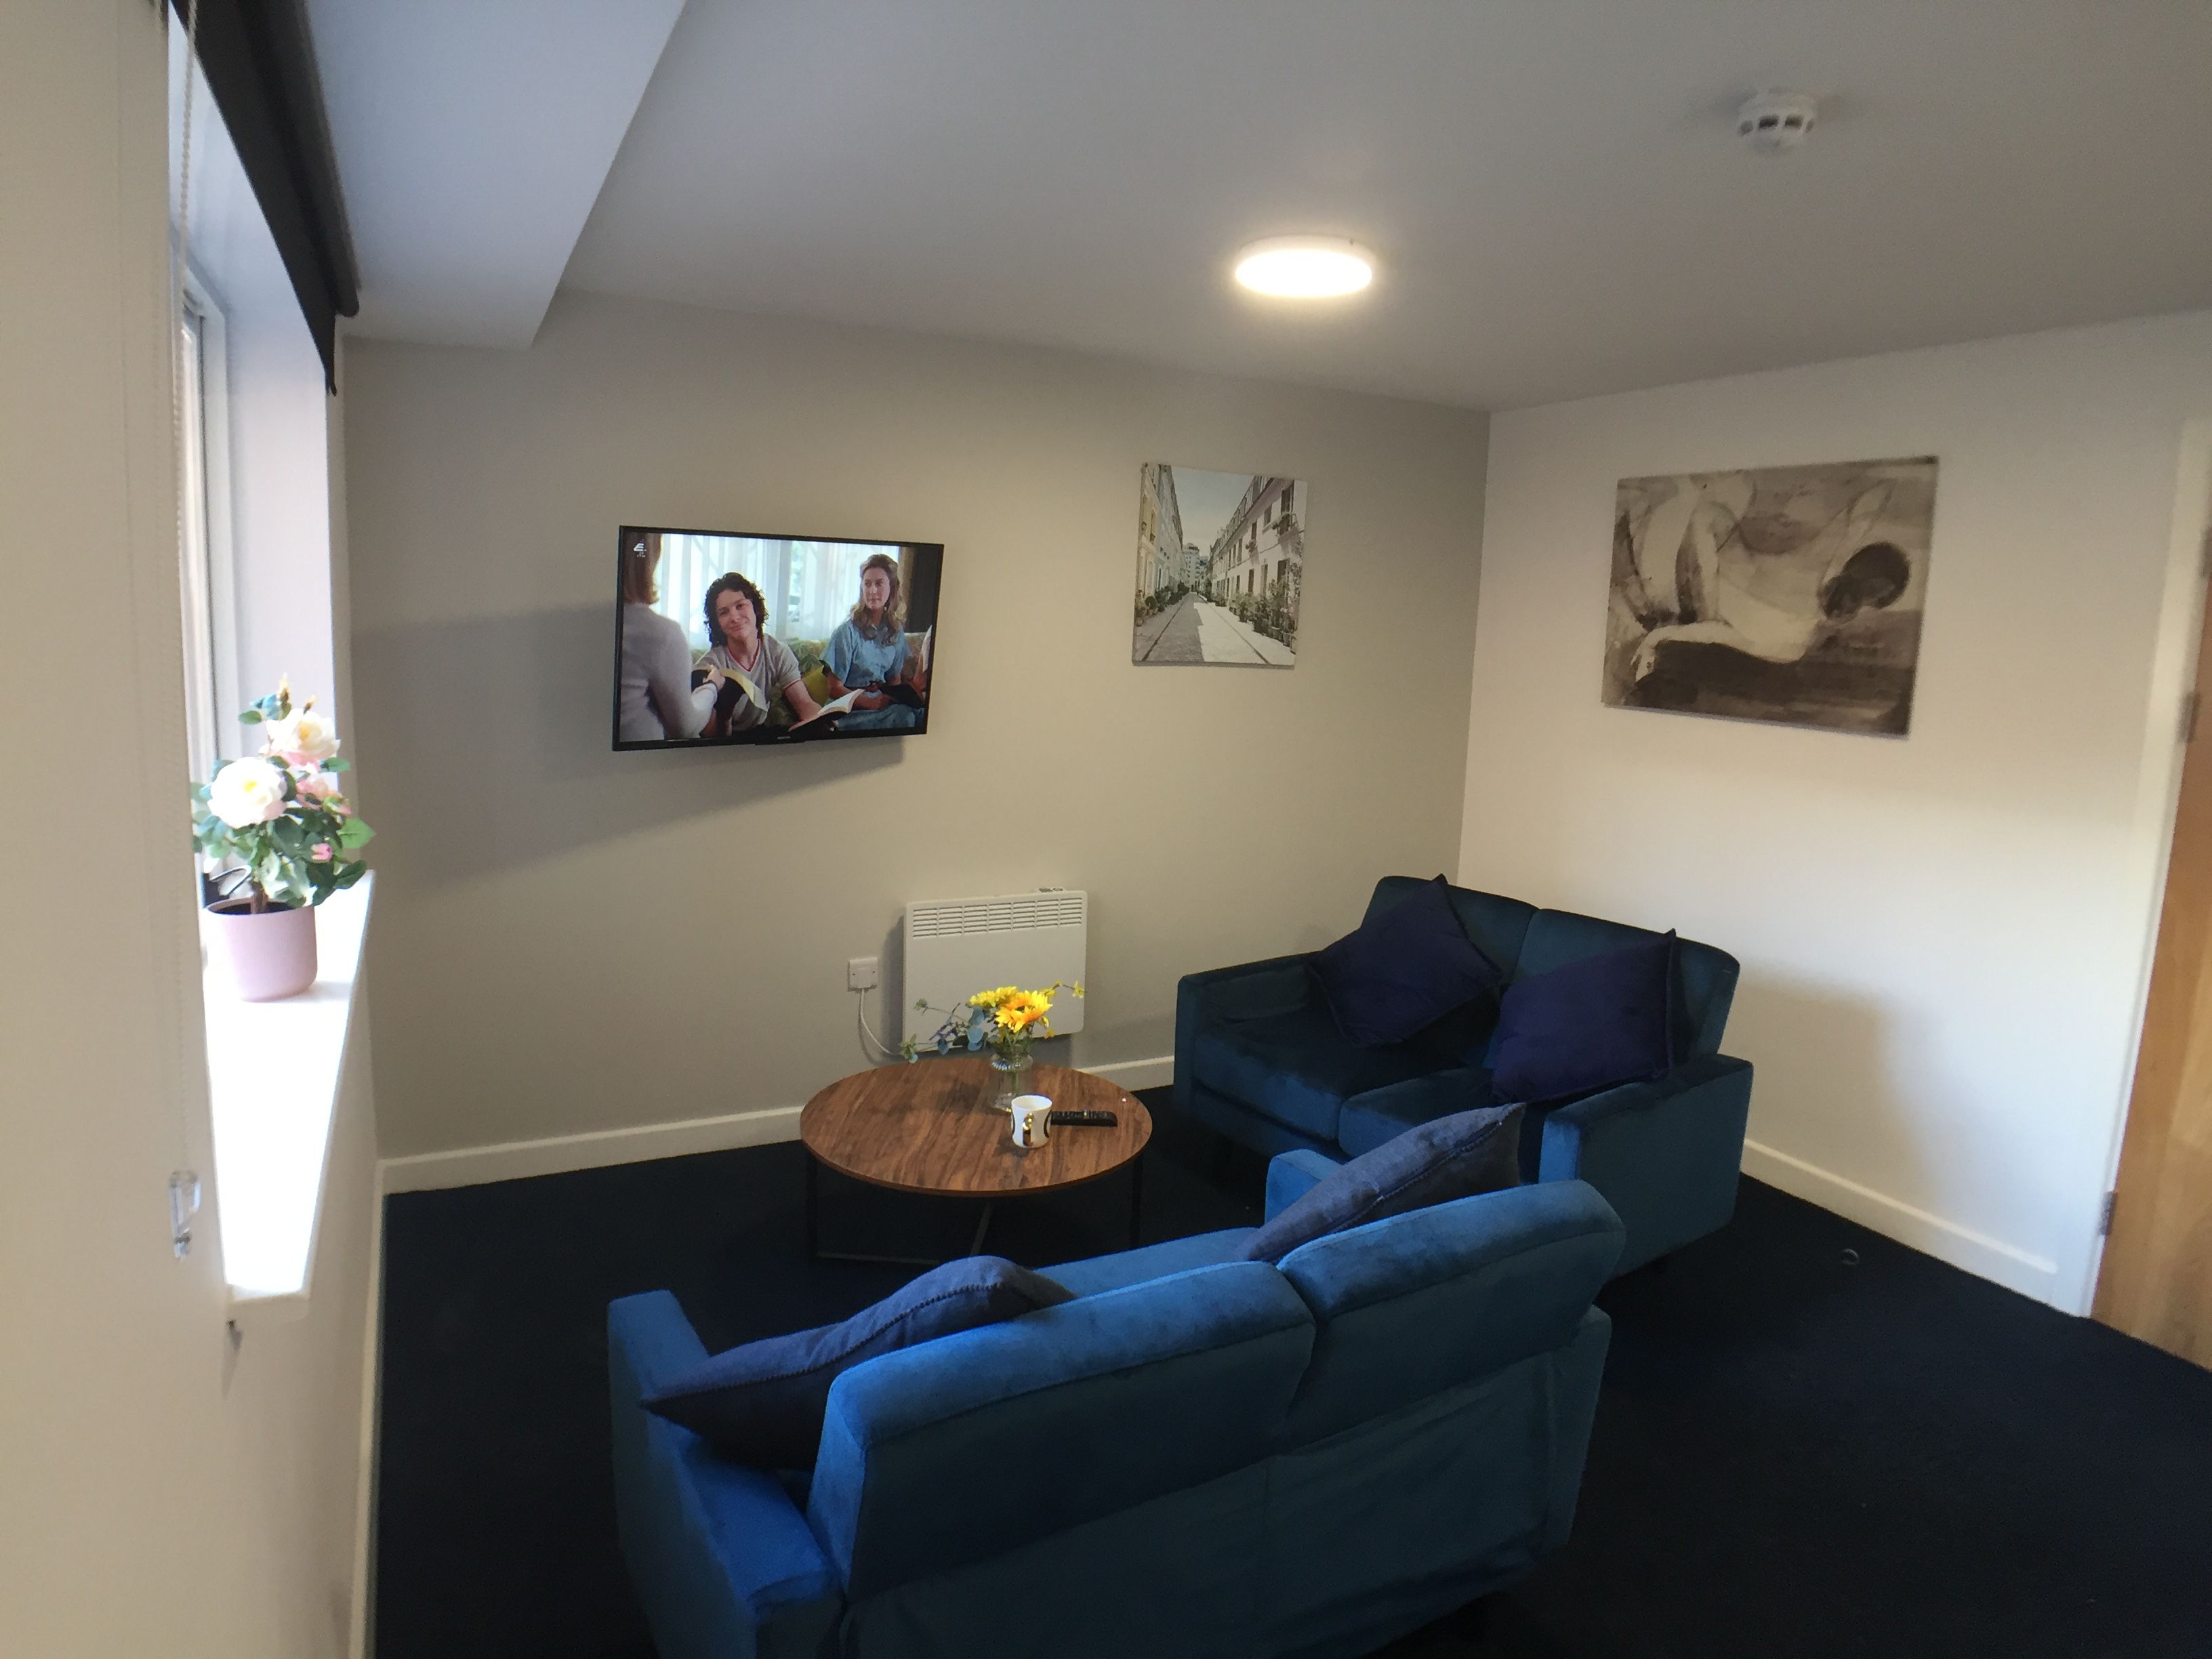 Student Accommodation Loughborough - Relax in our TV room with large Flat Screen